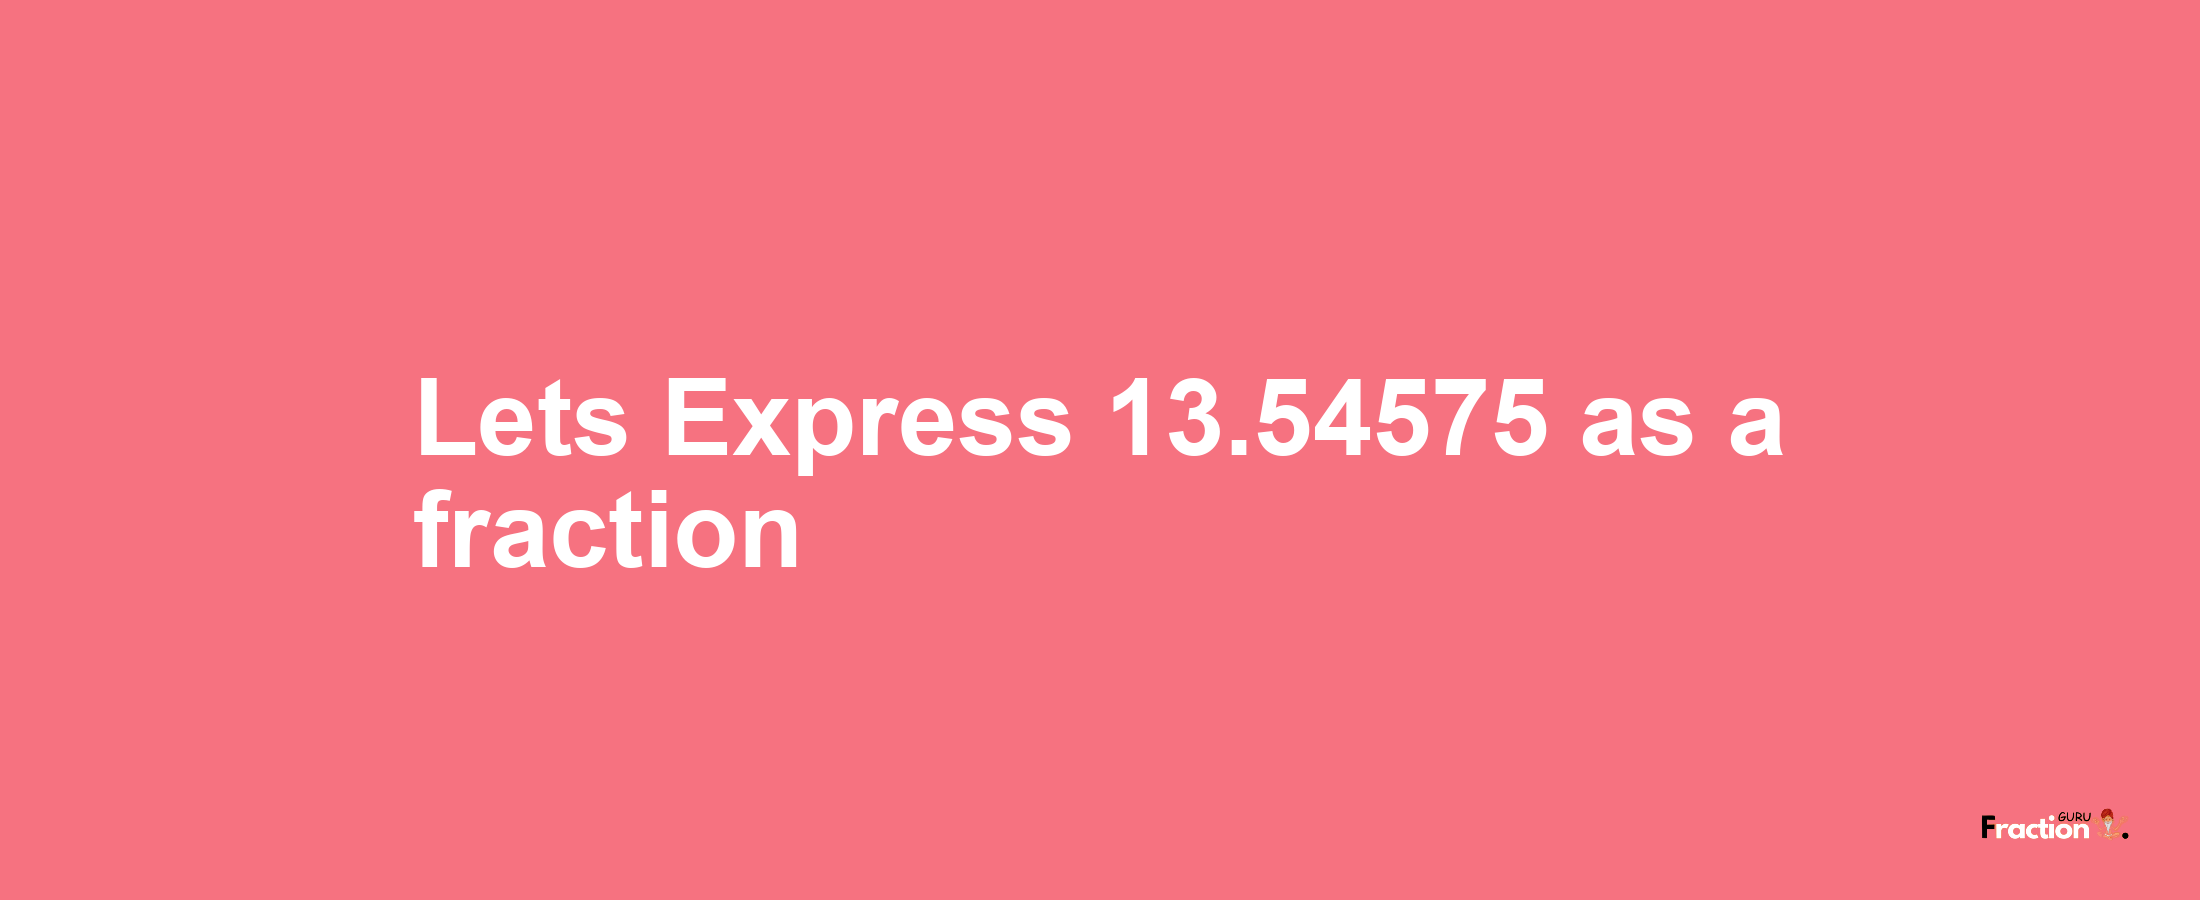 Lets Express 13.54575 as afraction